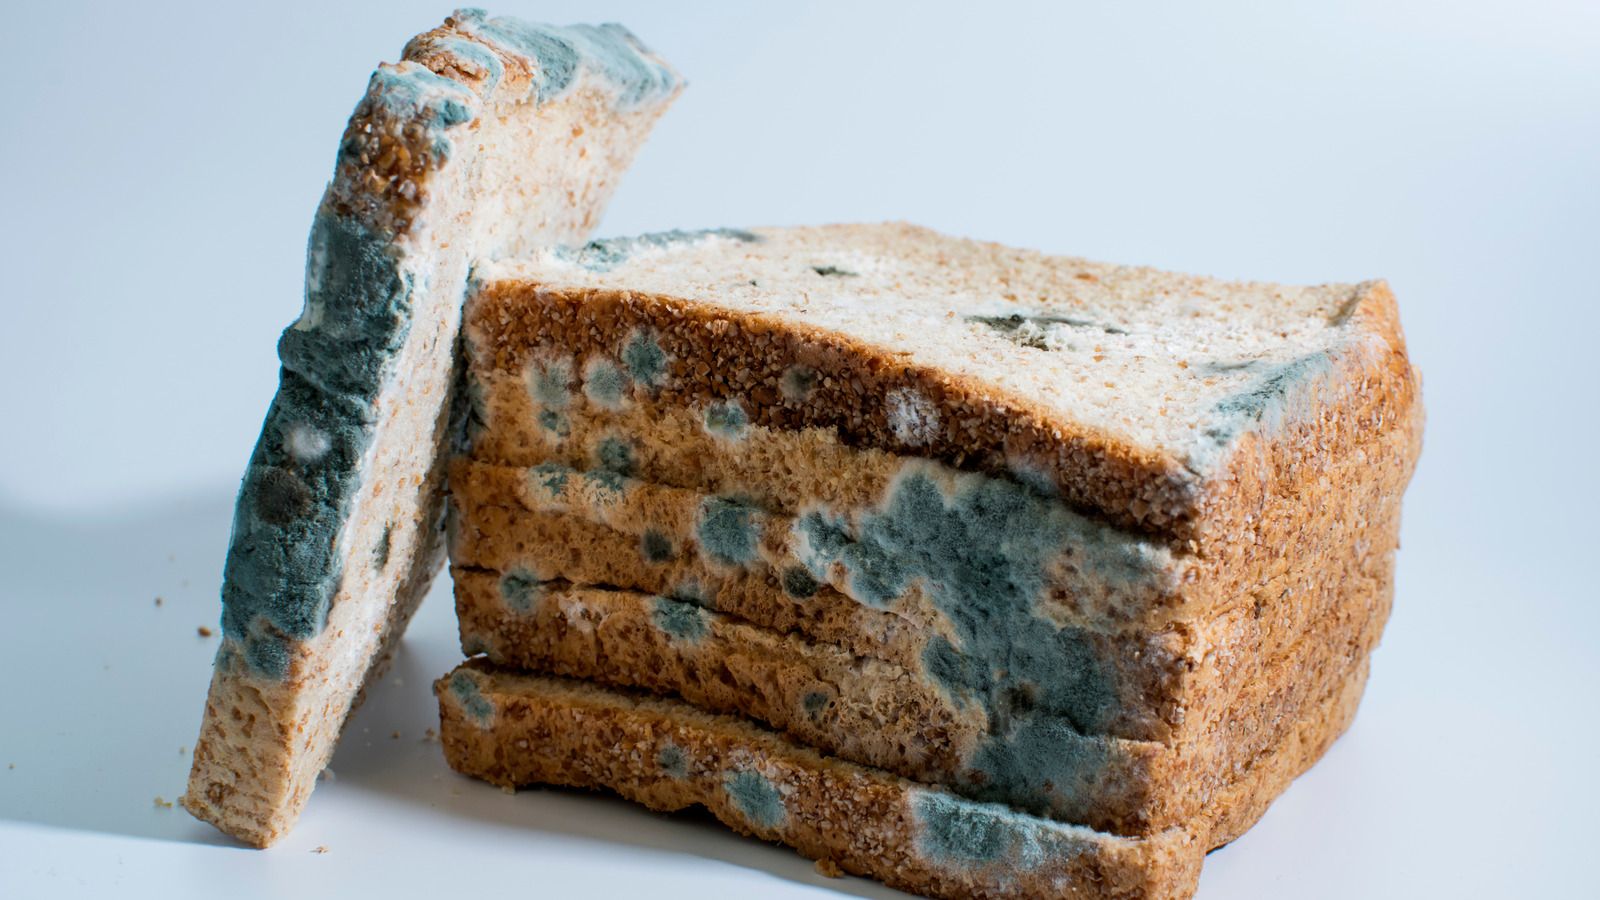 https://www.tastingtable.com/img/gallery/what-happens-if-you-accidentally-eat-mold/l-intro-1639068707.jpg